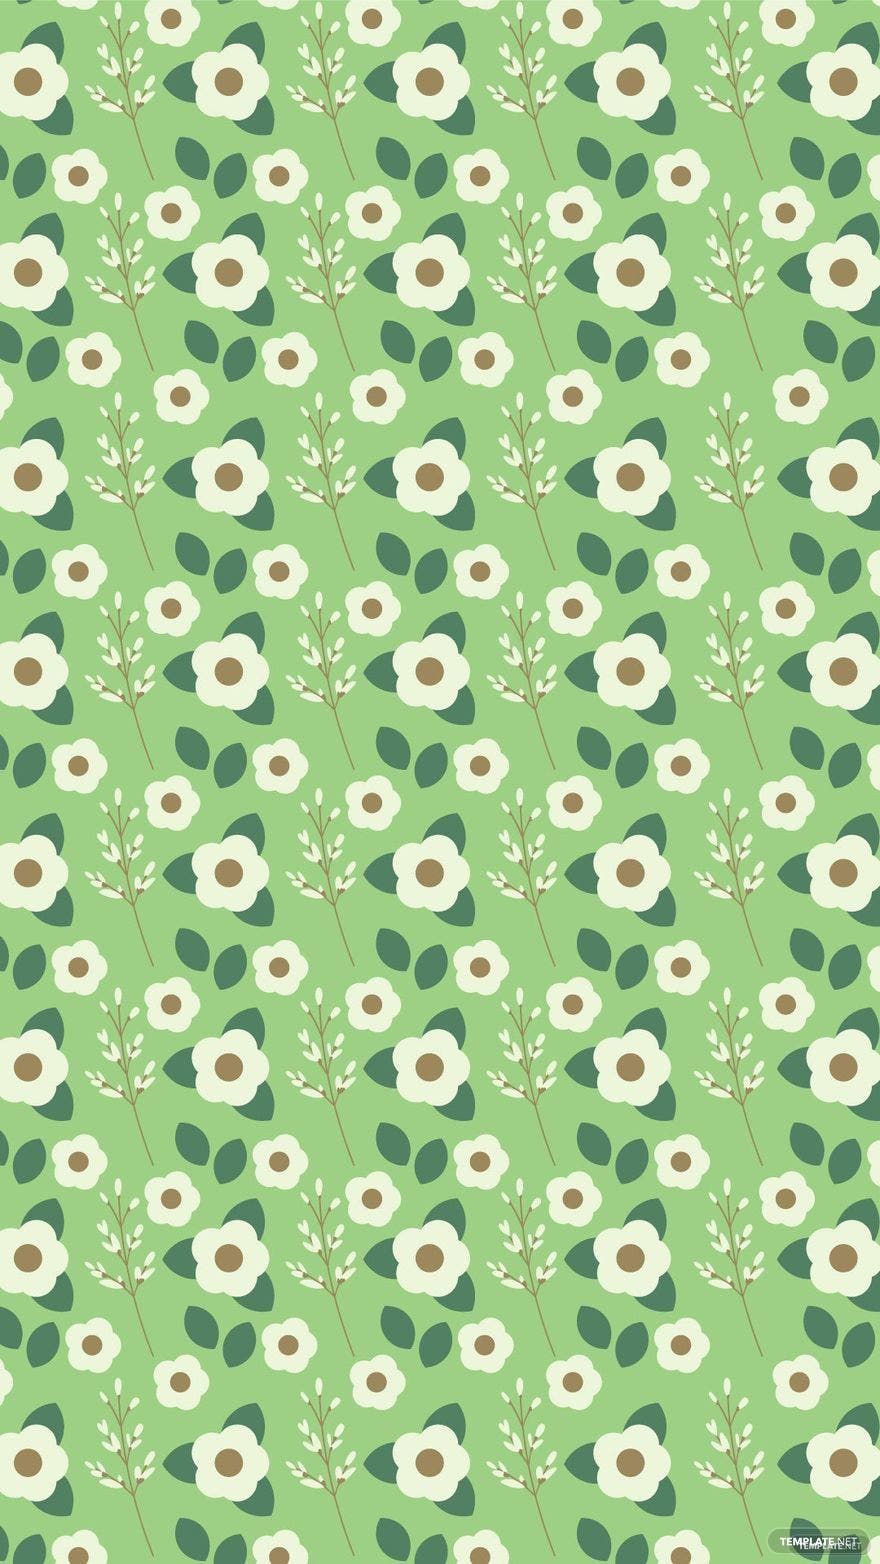 Green Floral Background Vector